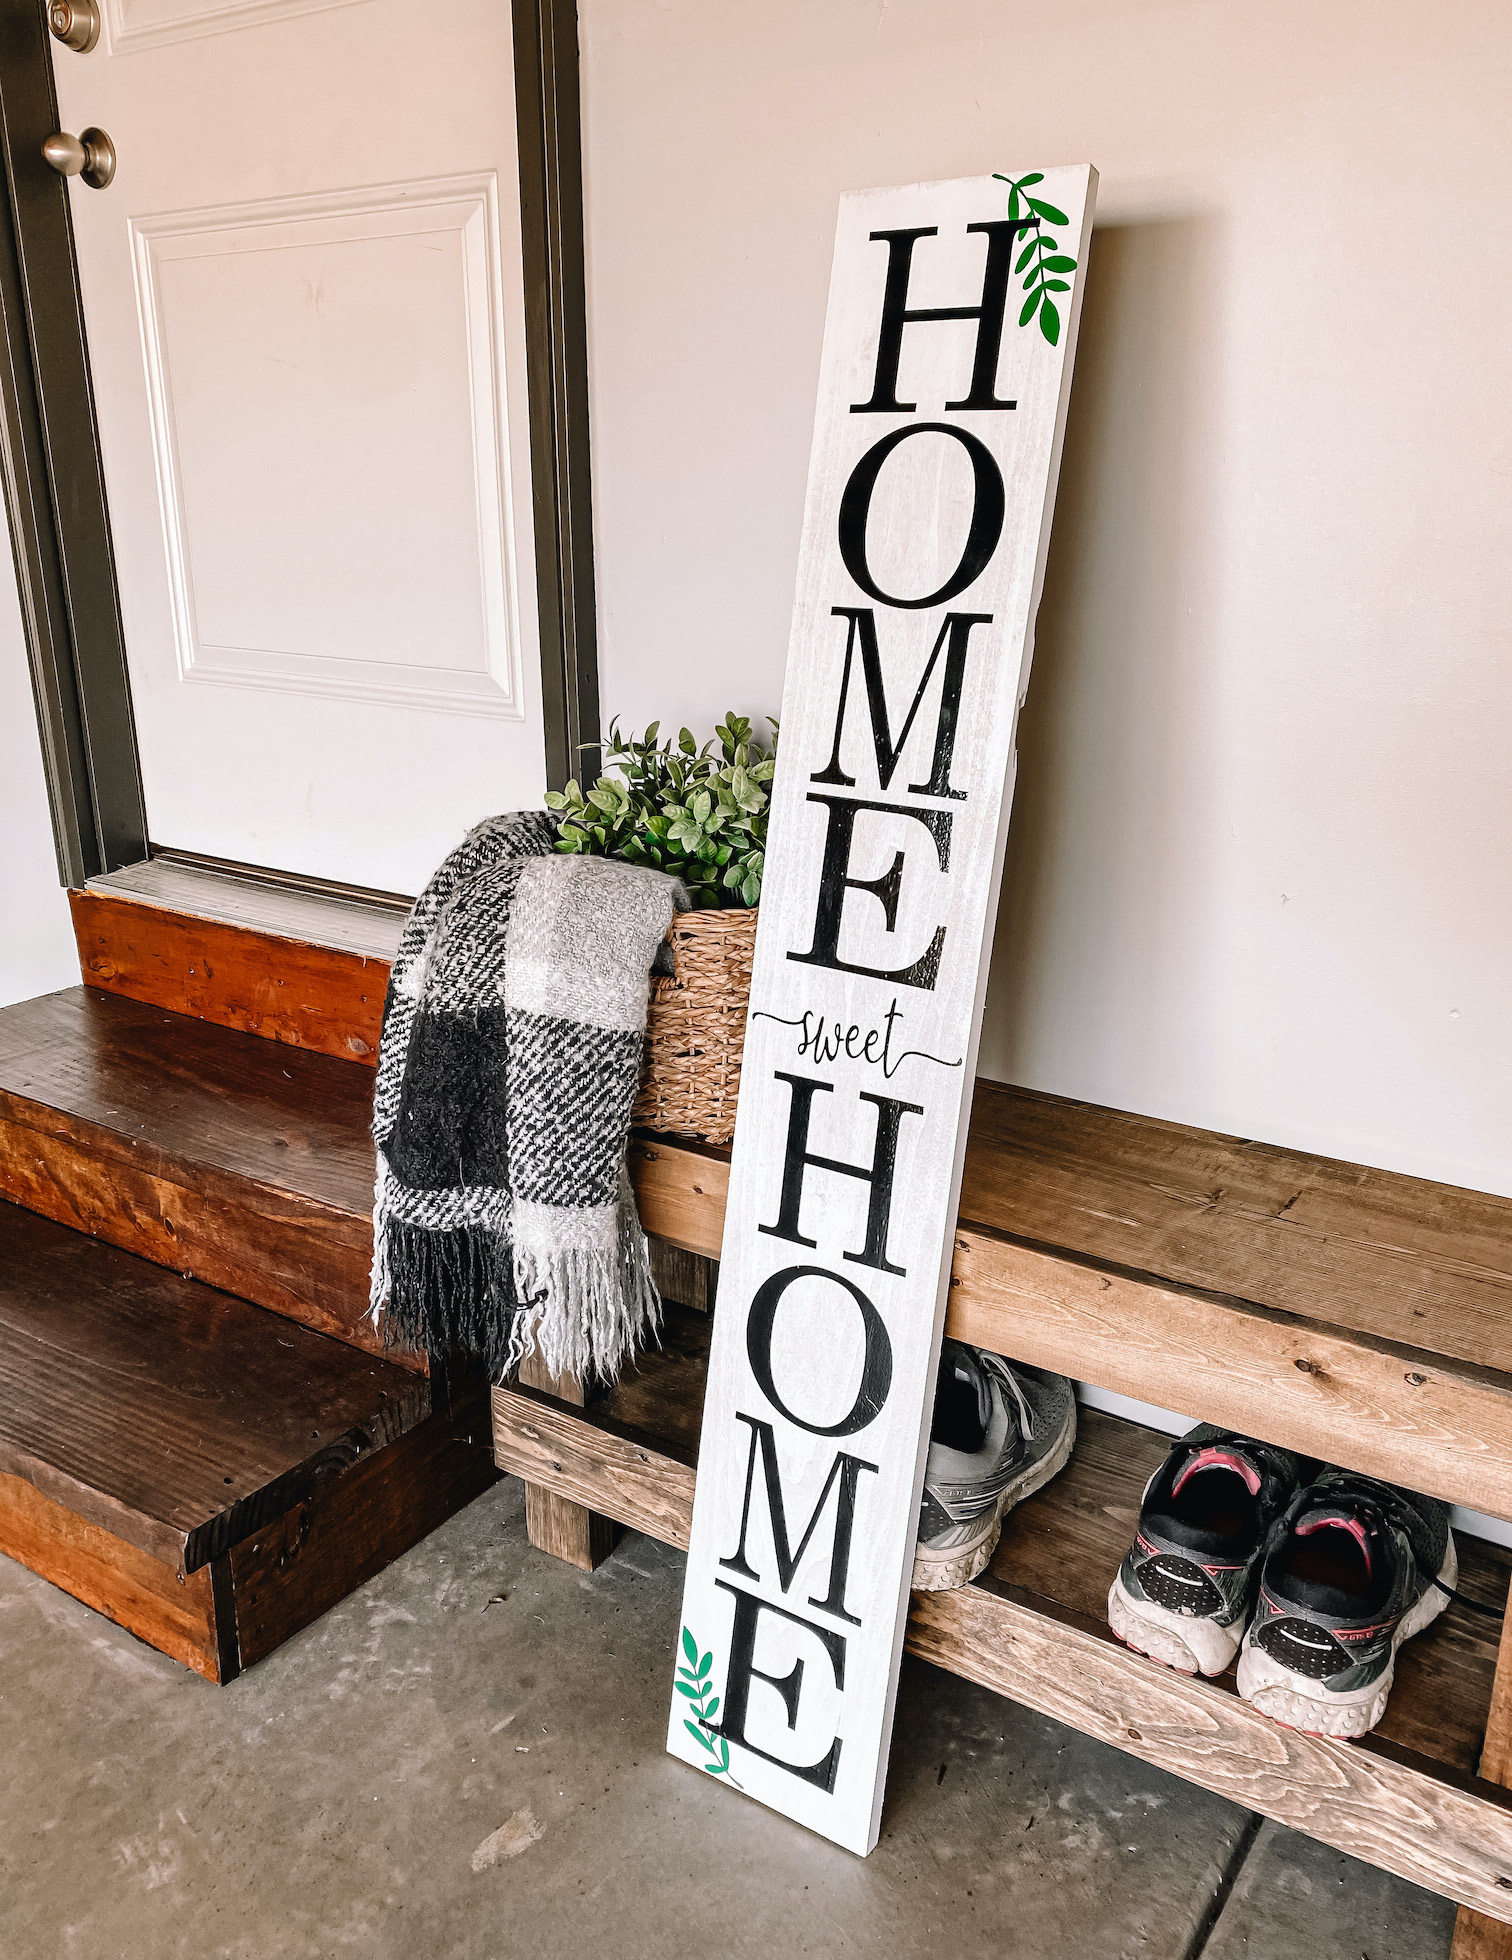 https://thefoodiesfithome.com/wp-content/uploads/2021/02/DIY-Home-Sweet-Home-Sign-Garage.jpg